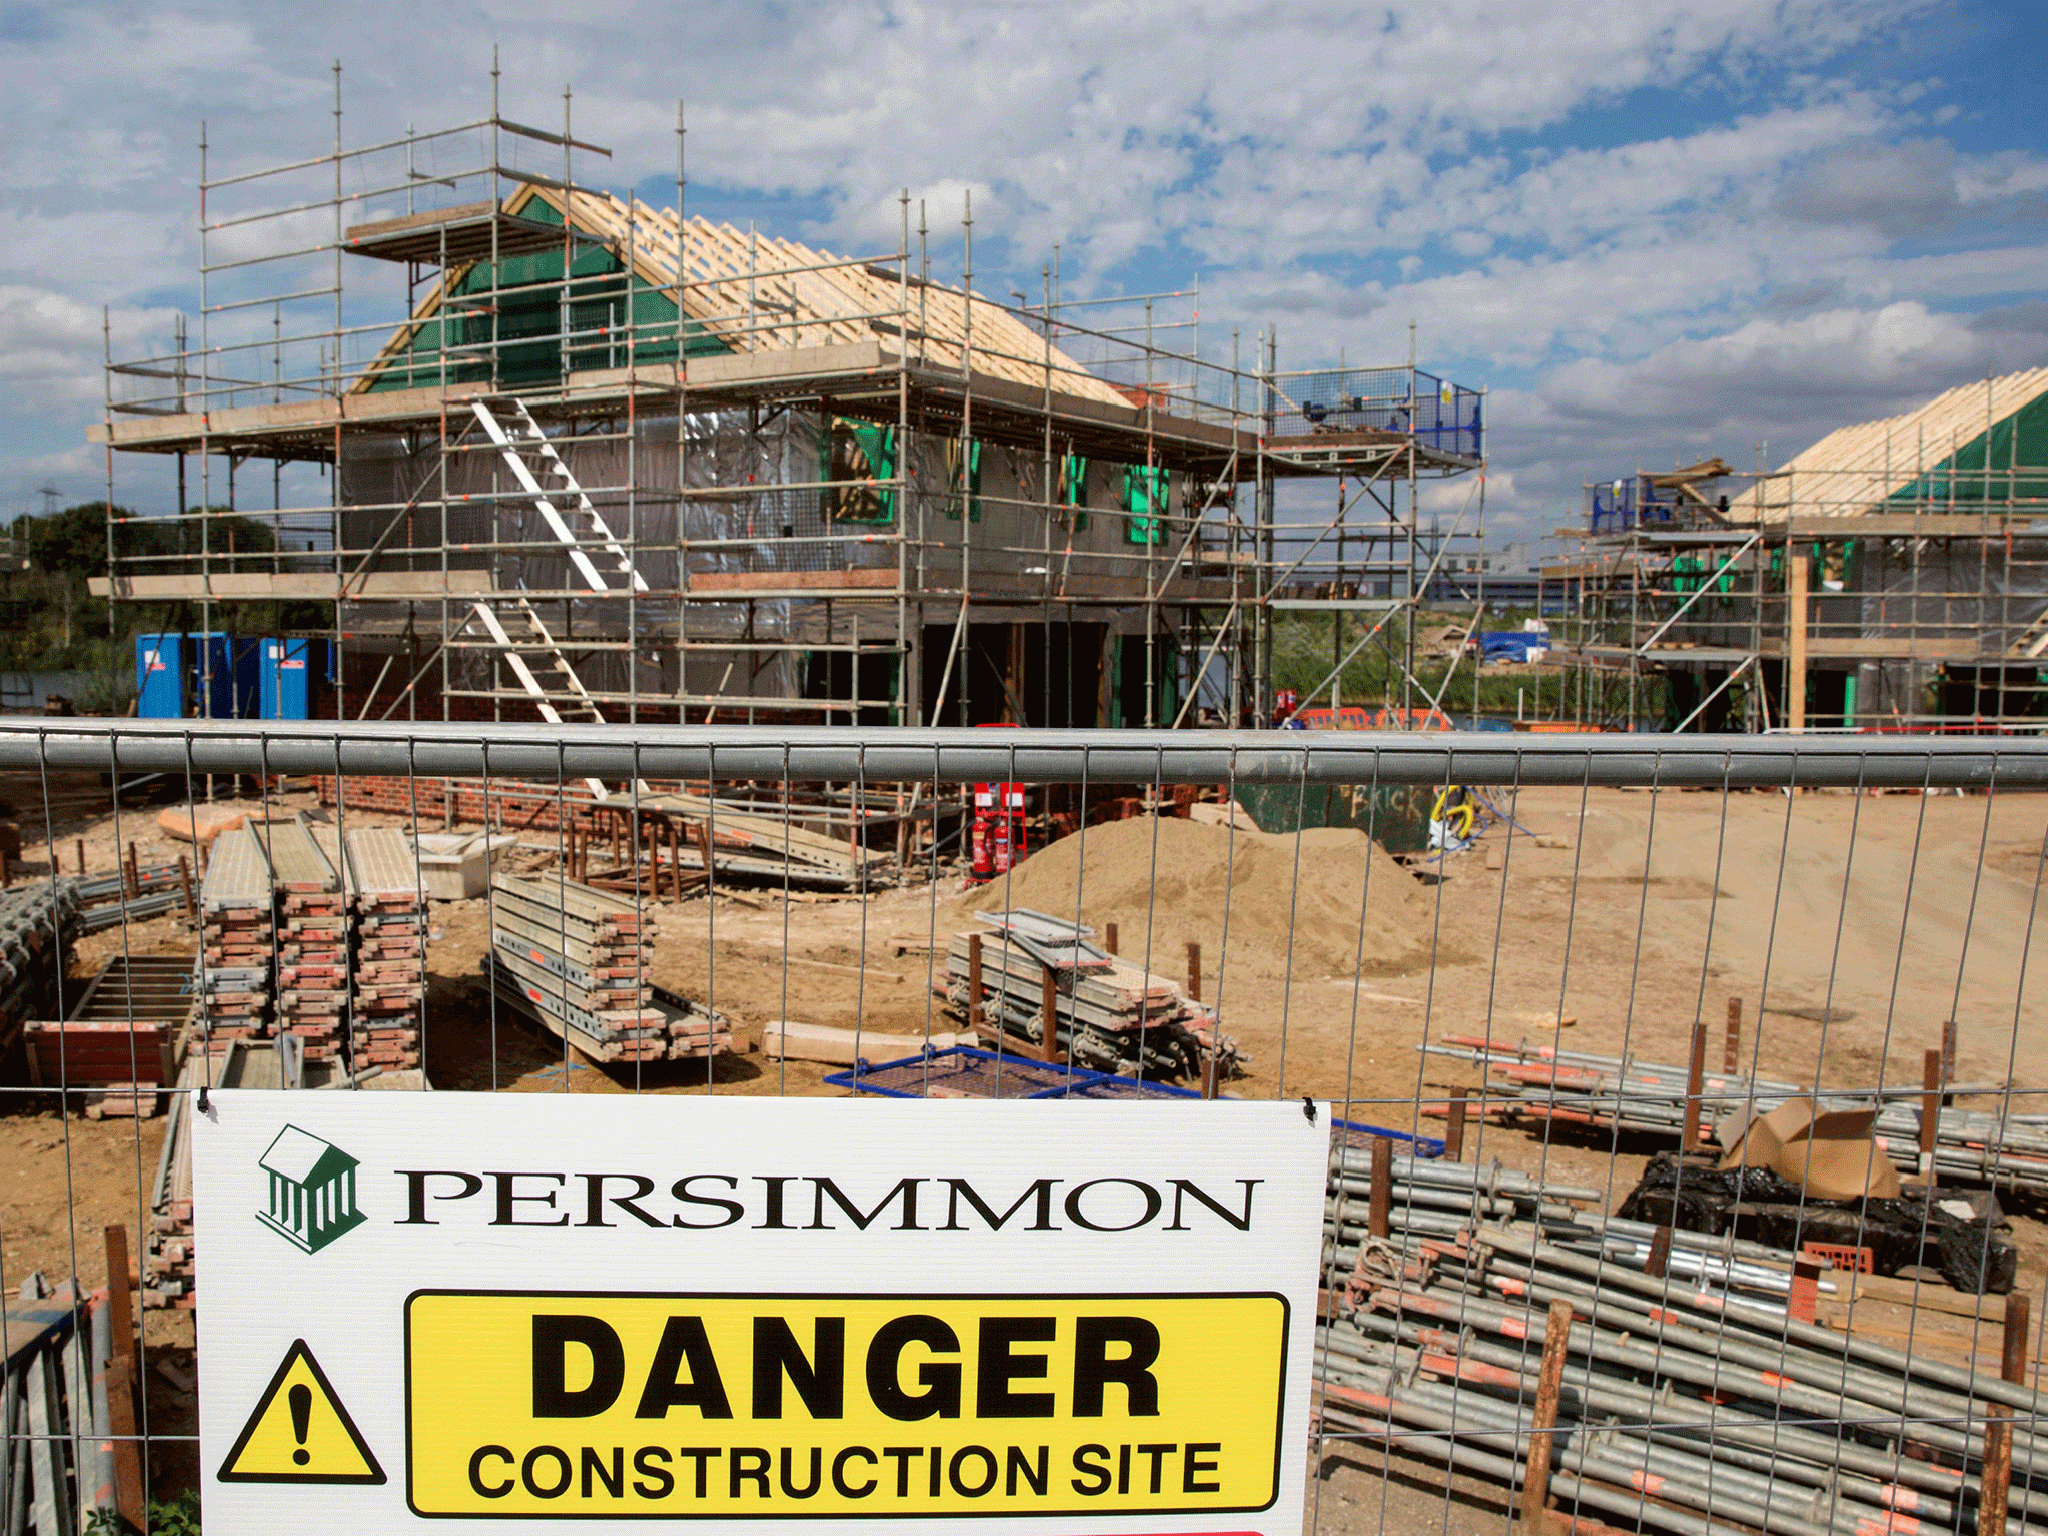 A £100m plus bonus package for Persimmon's CEO has reignited the debate over bosses' pay